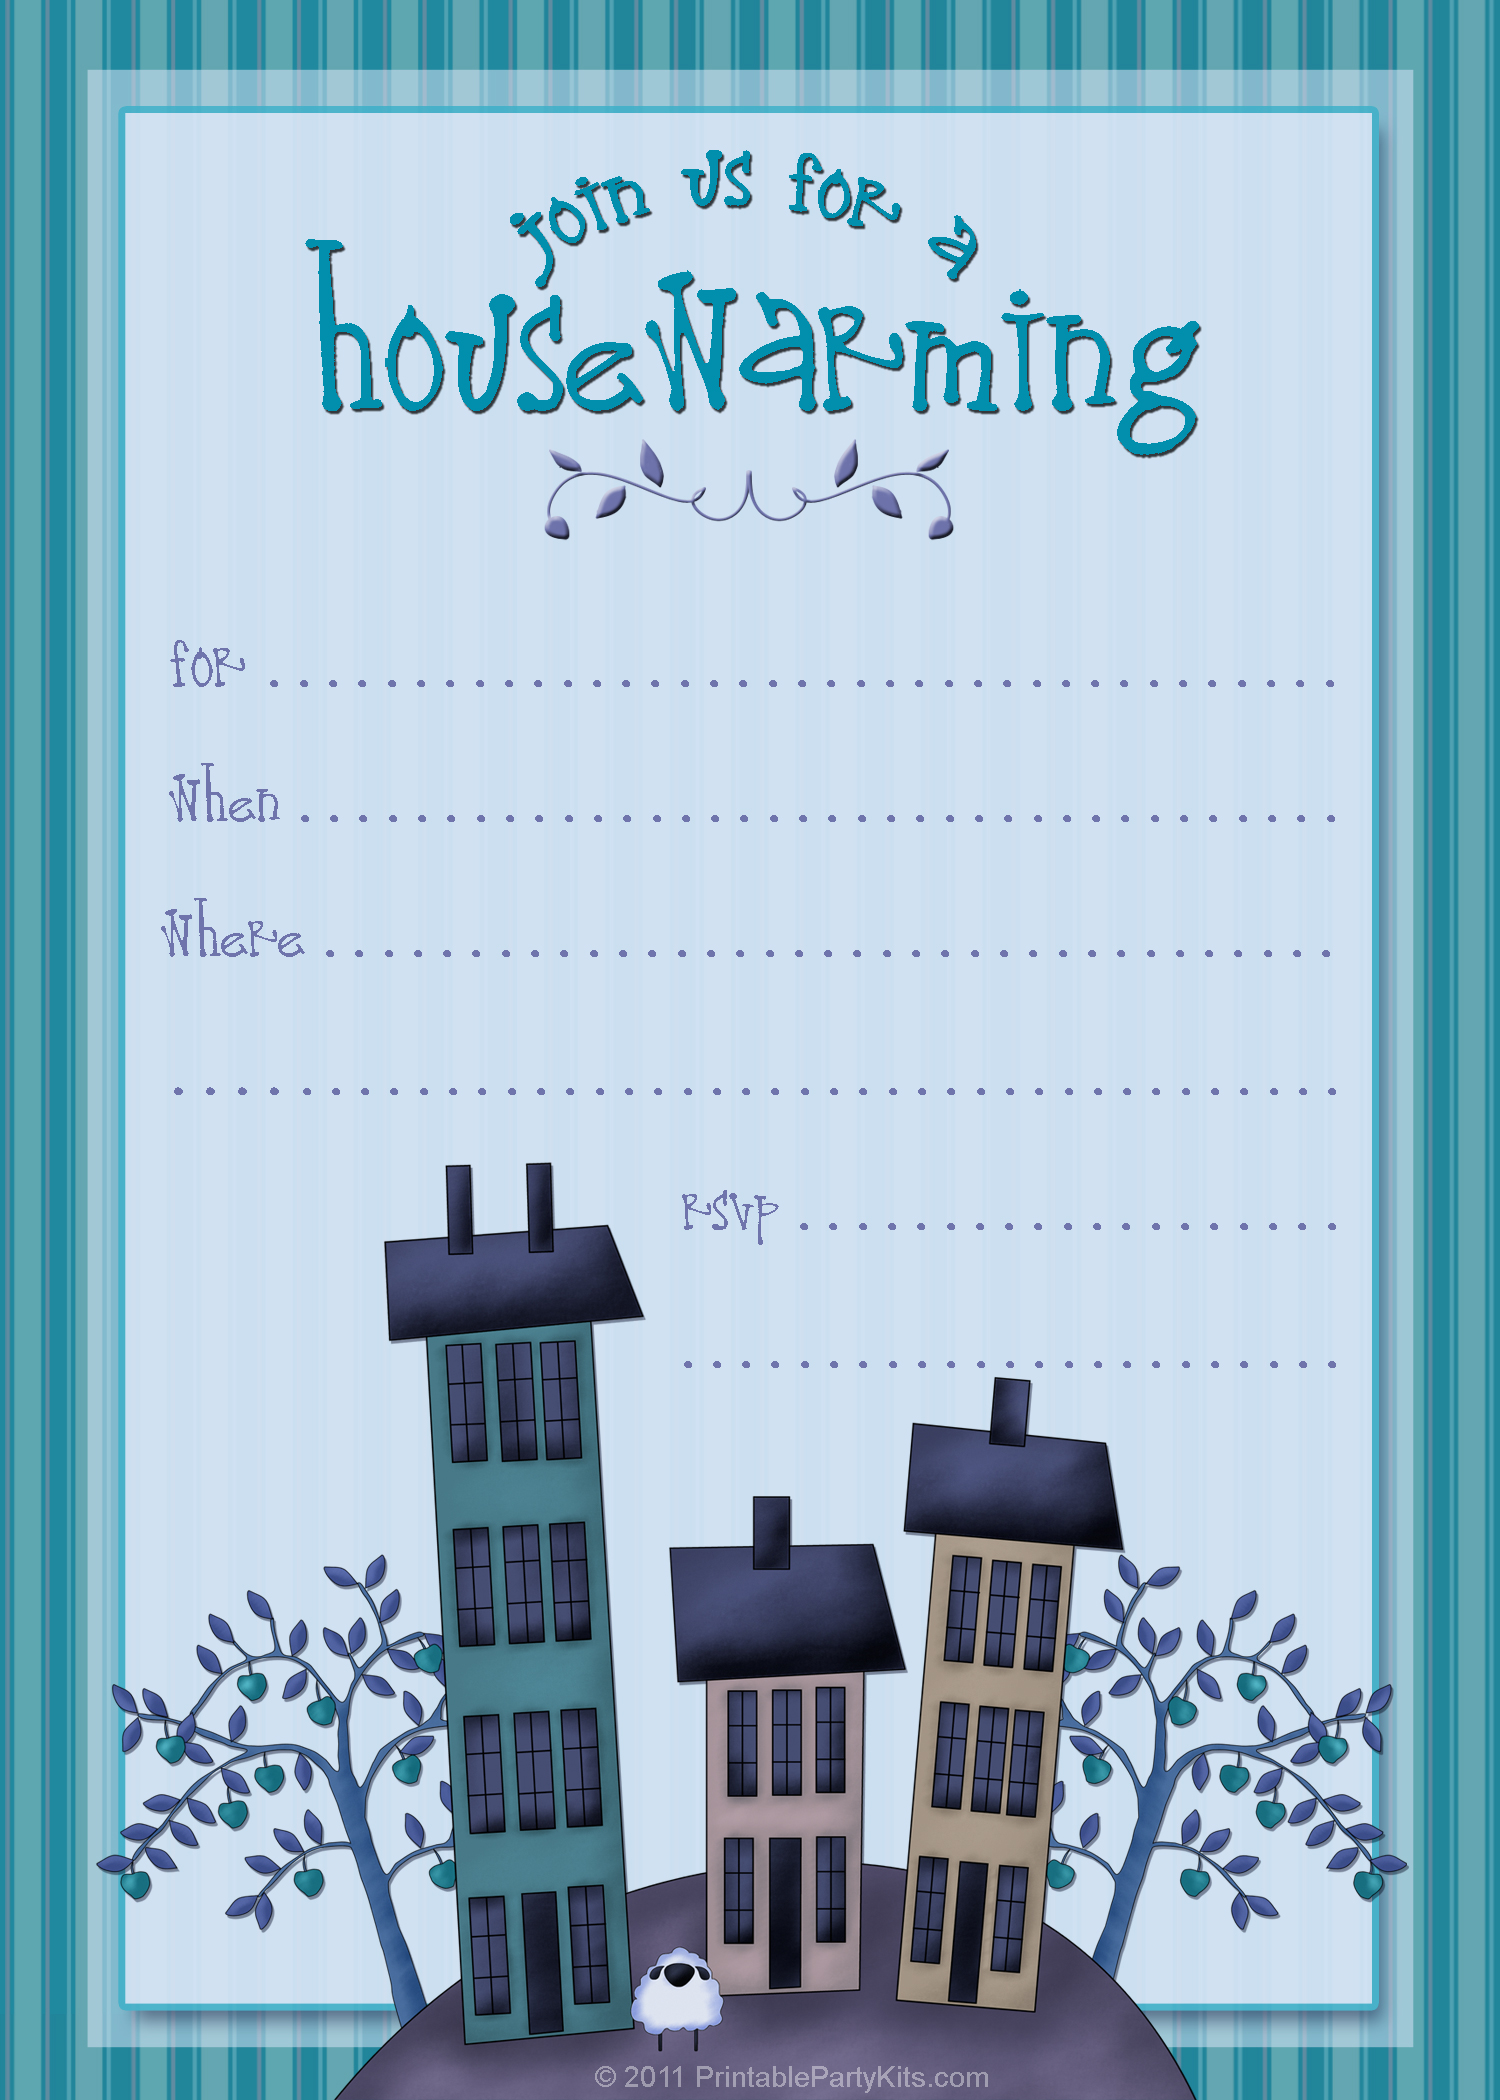 free-house-warming-clipart-clipground